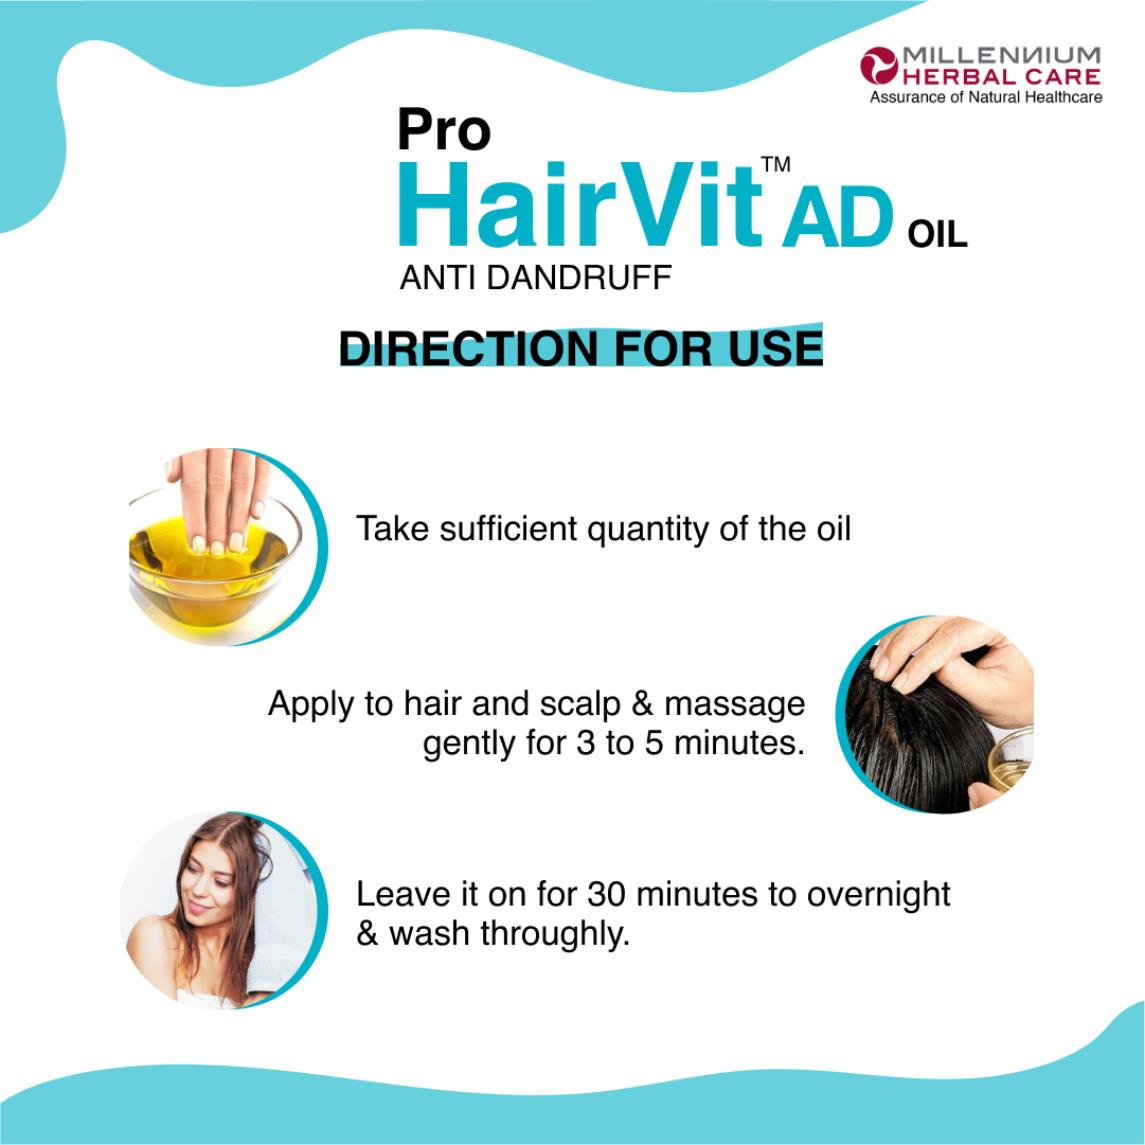 Direction For Use of Pro Hairvit AD Oil